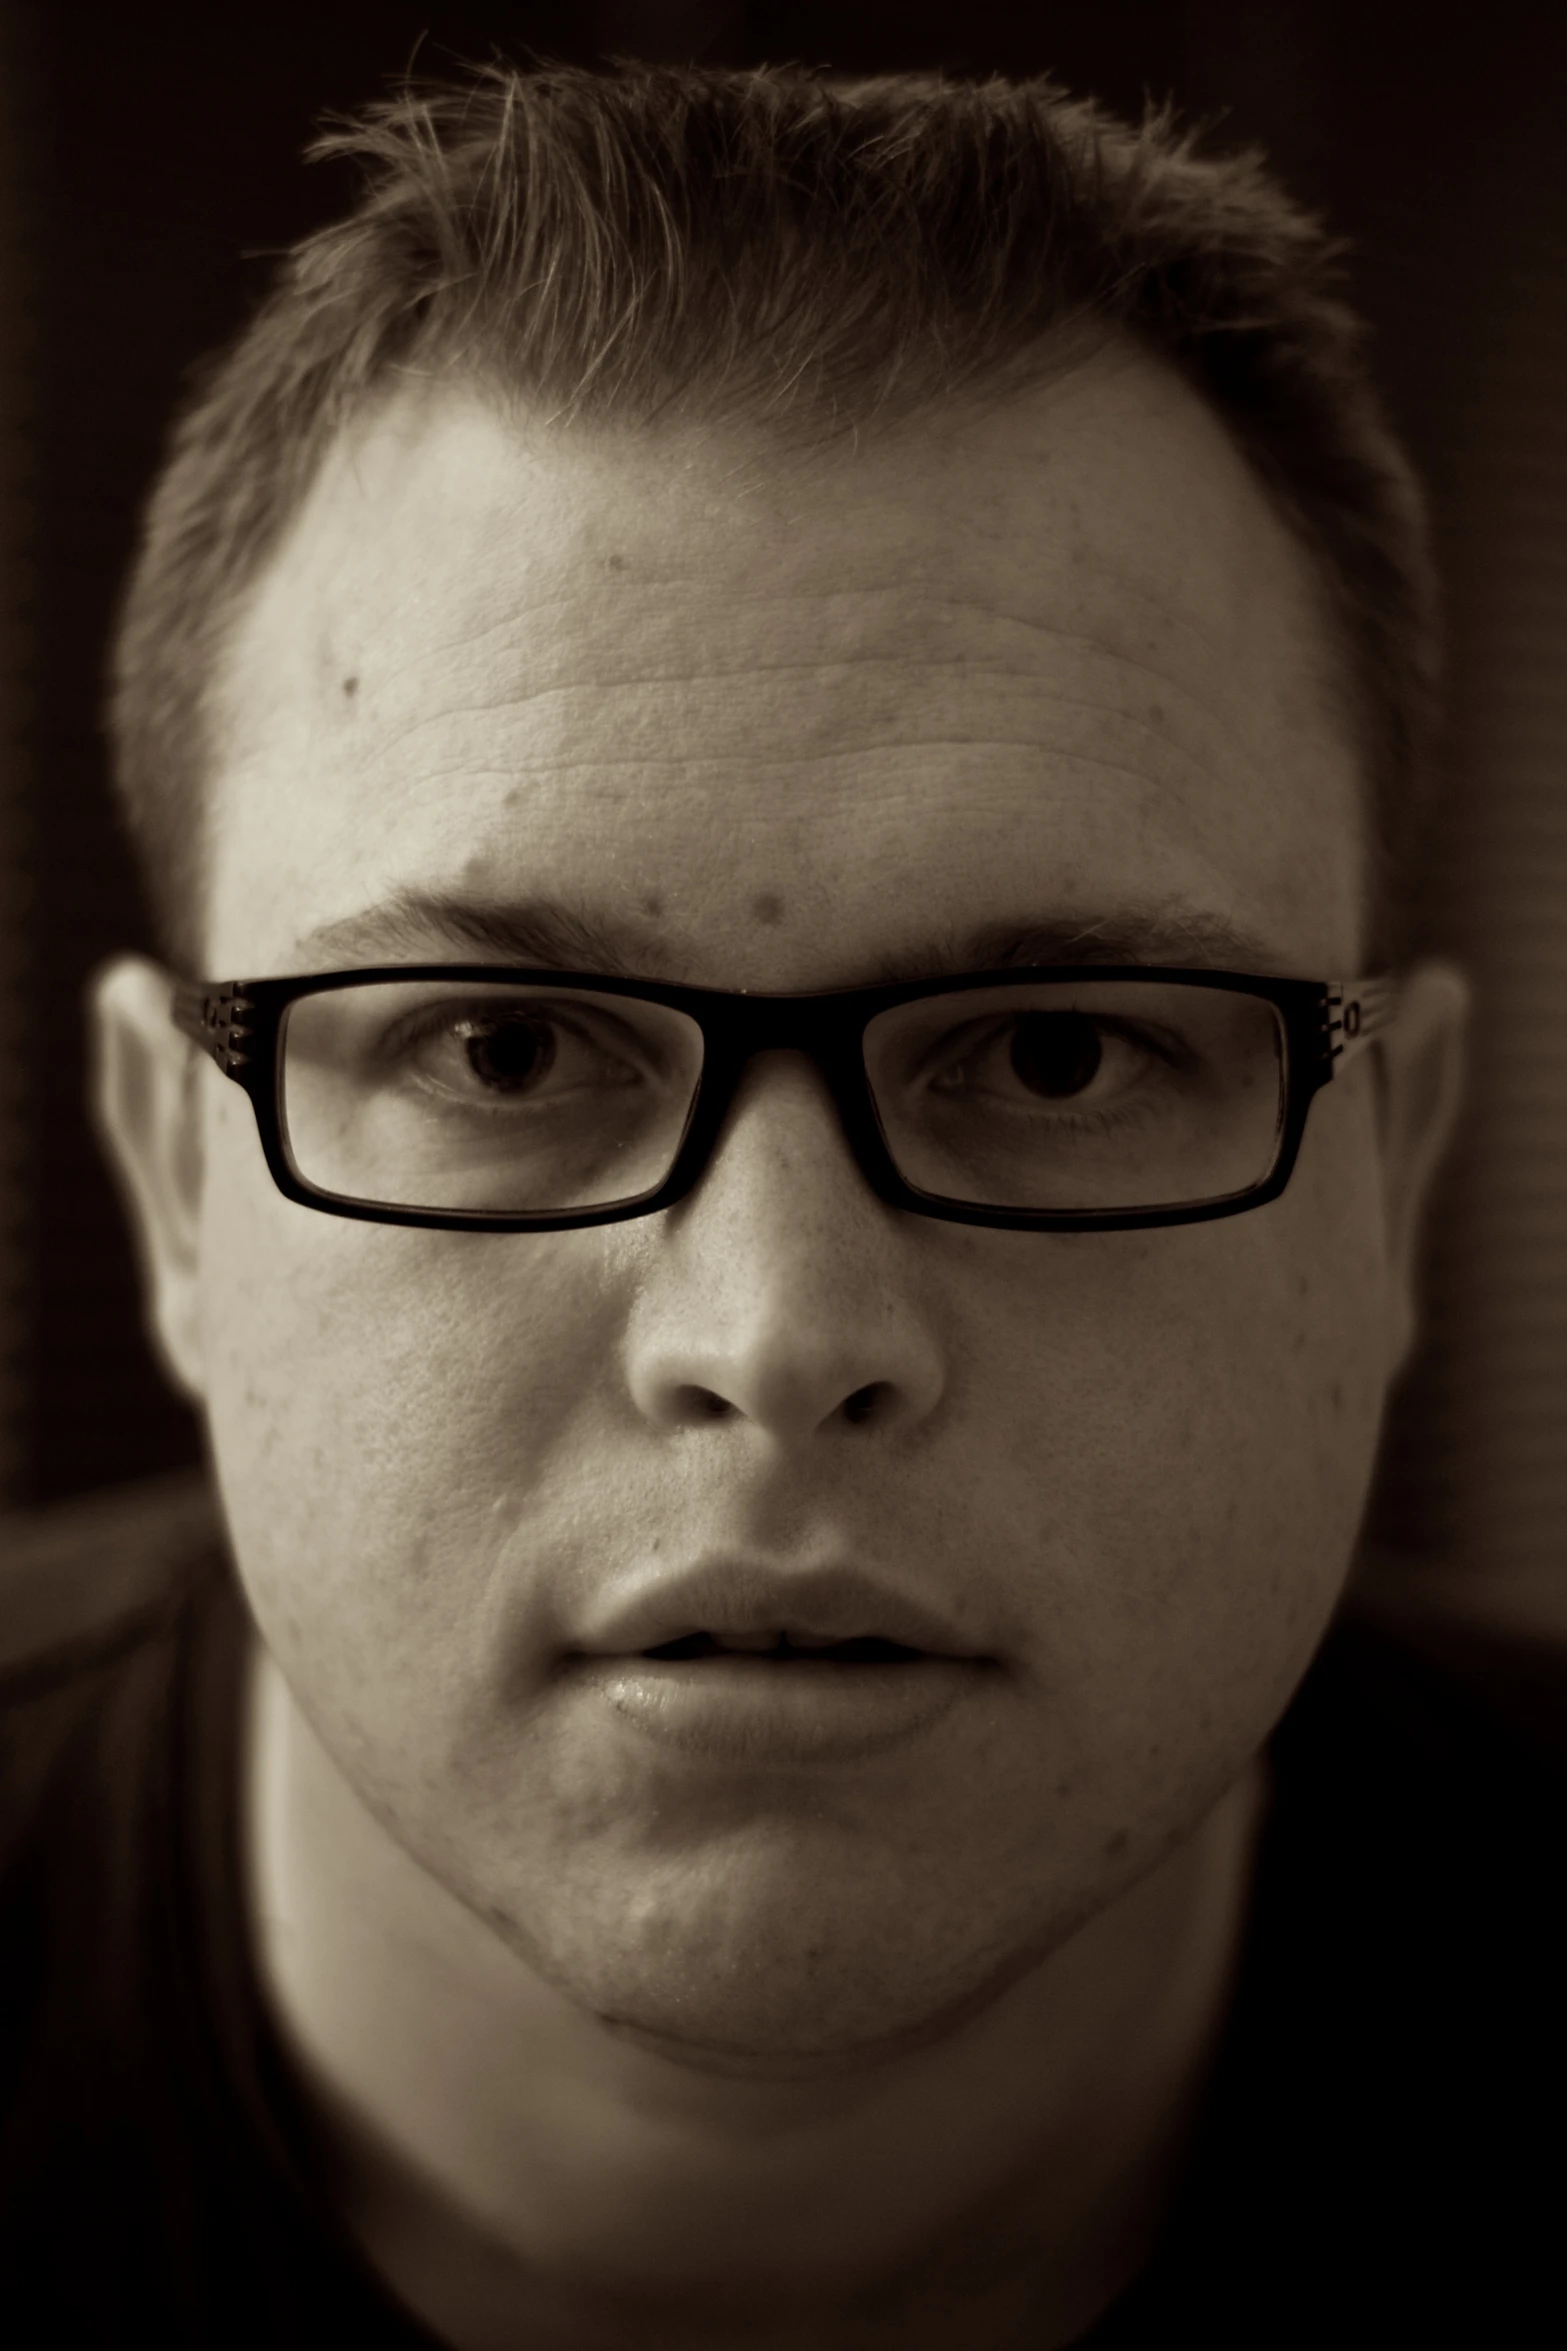 man with black glasses looking very serious in sepia